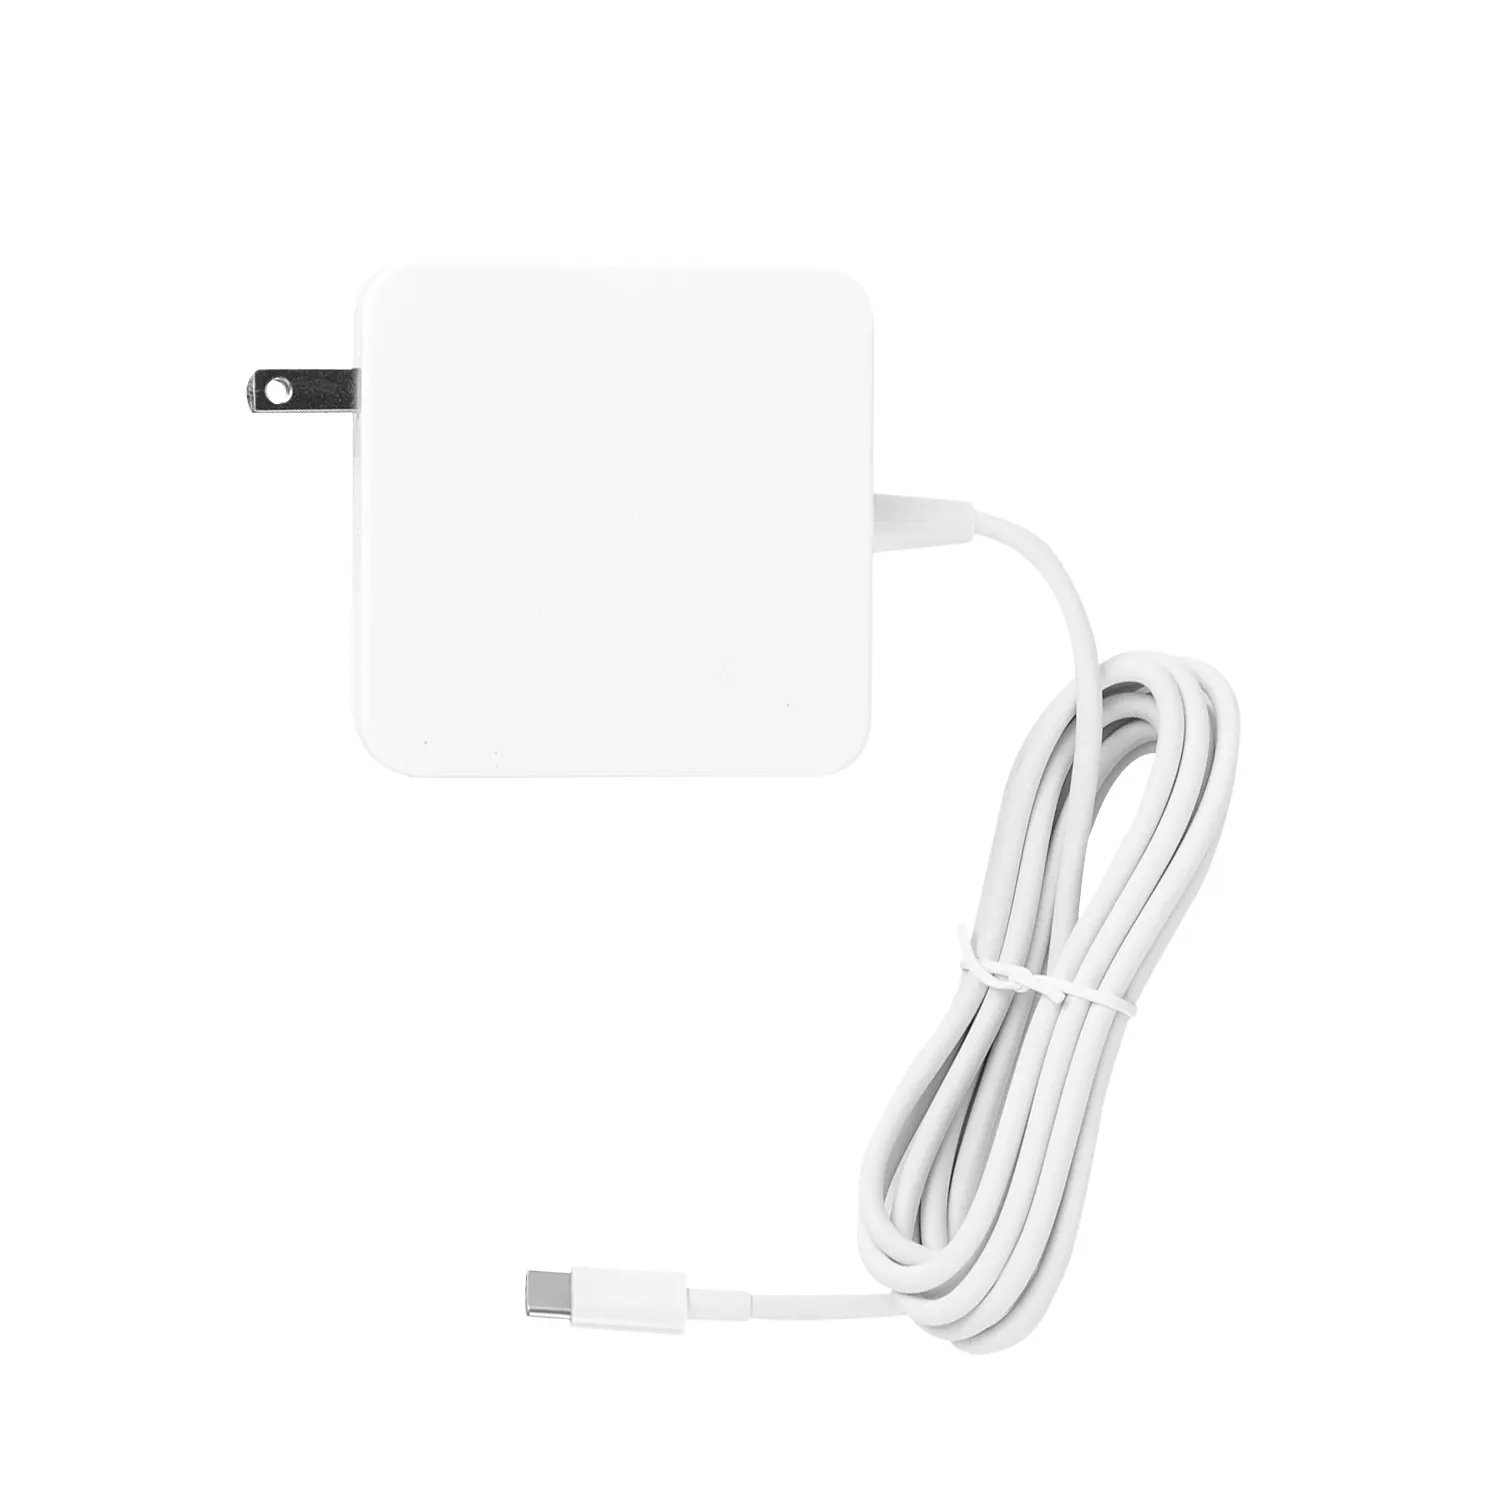 EU Plug PD 61W USB C Power Adapter Charger for Macbook